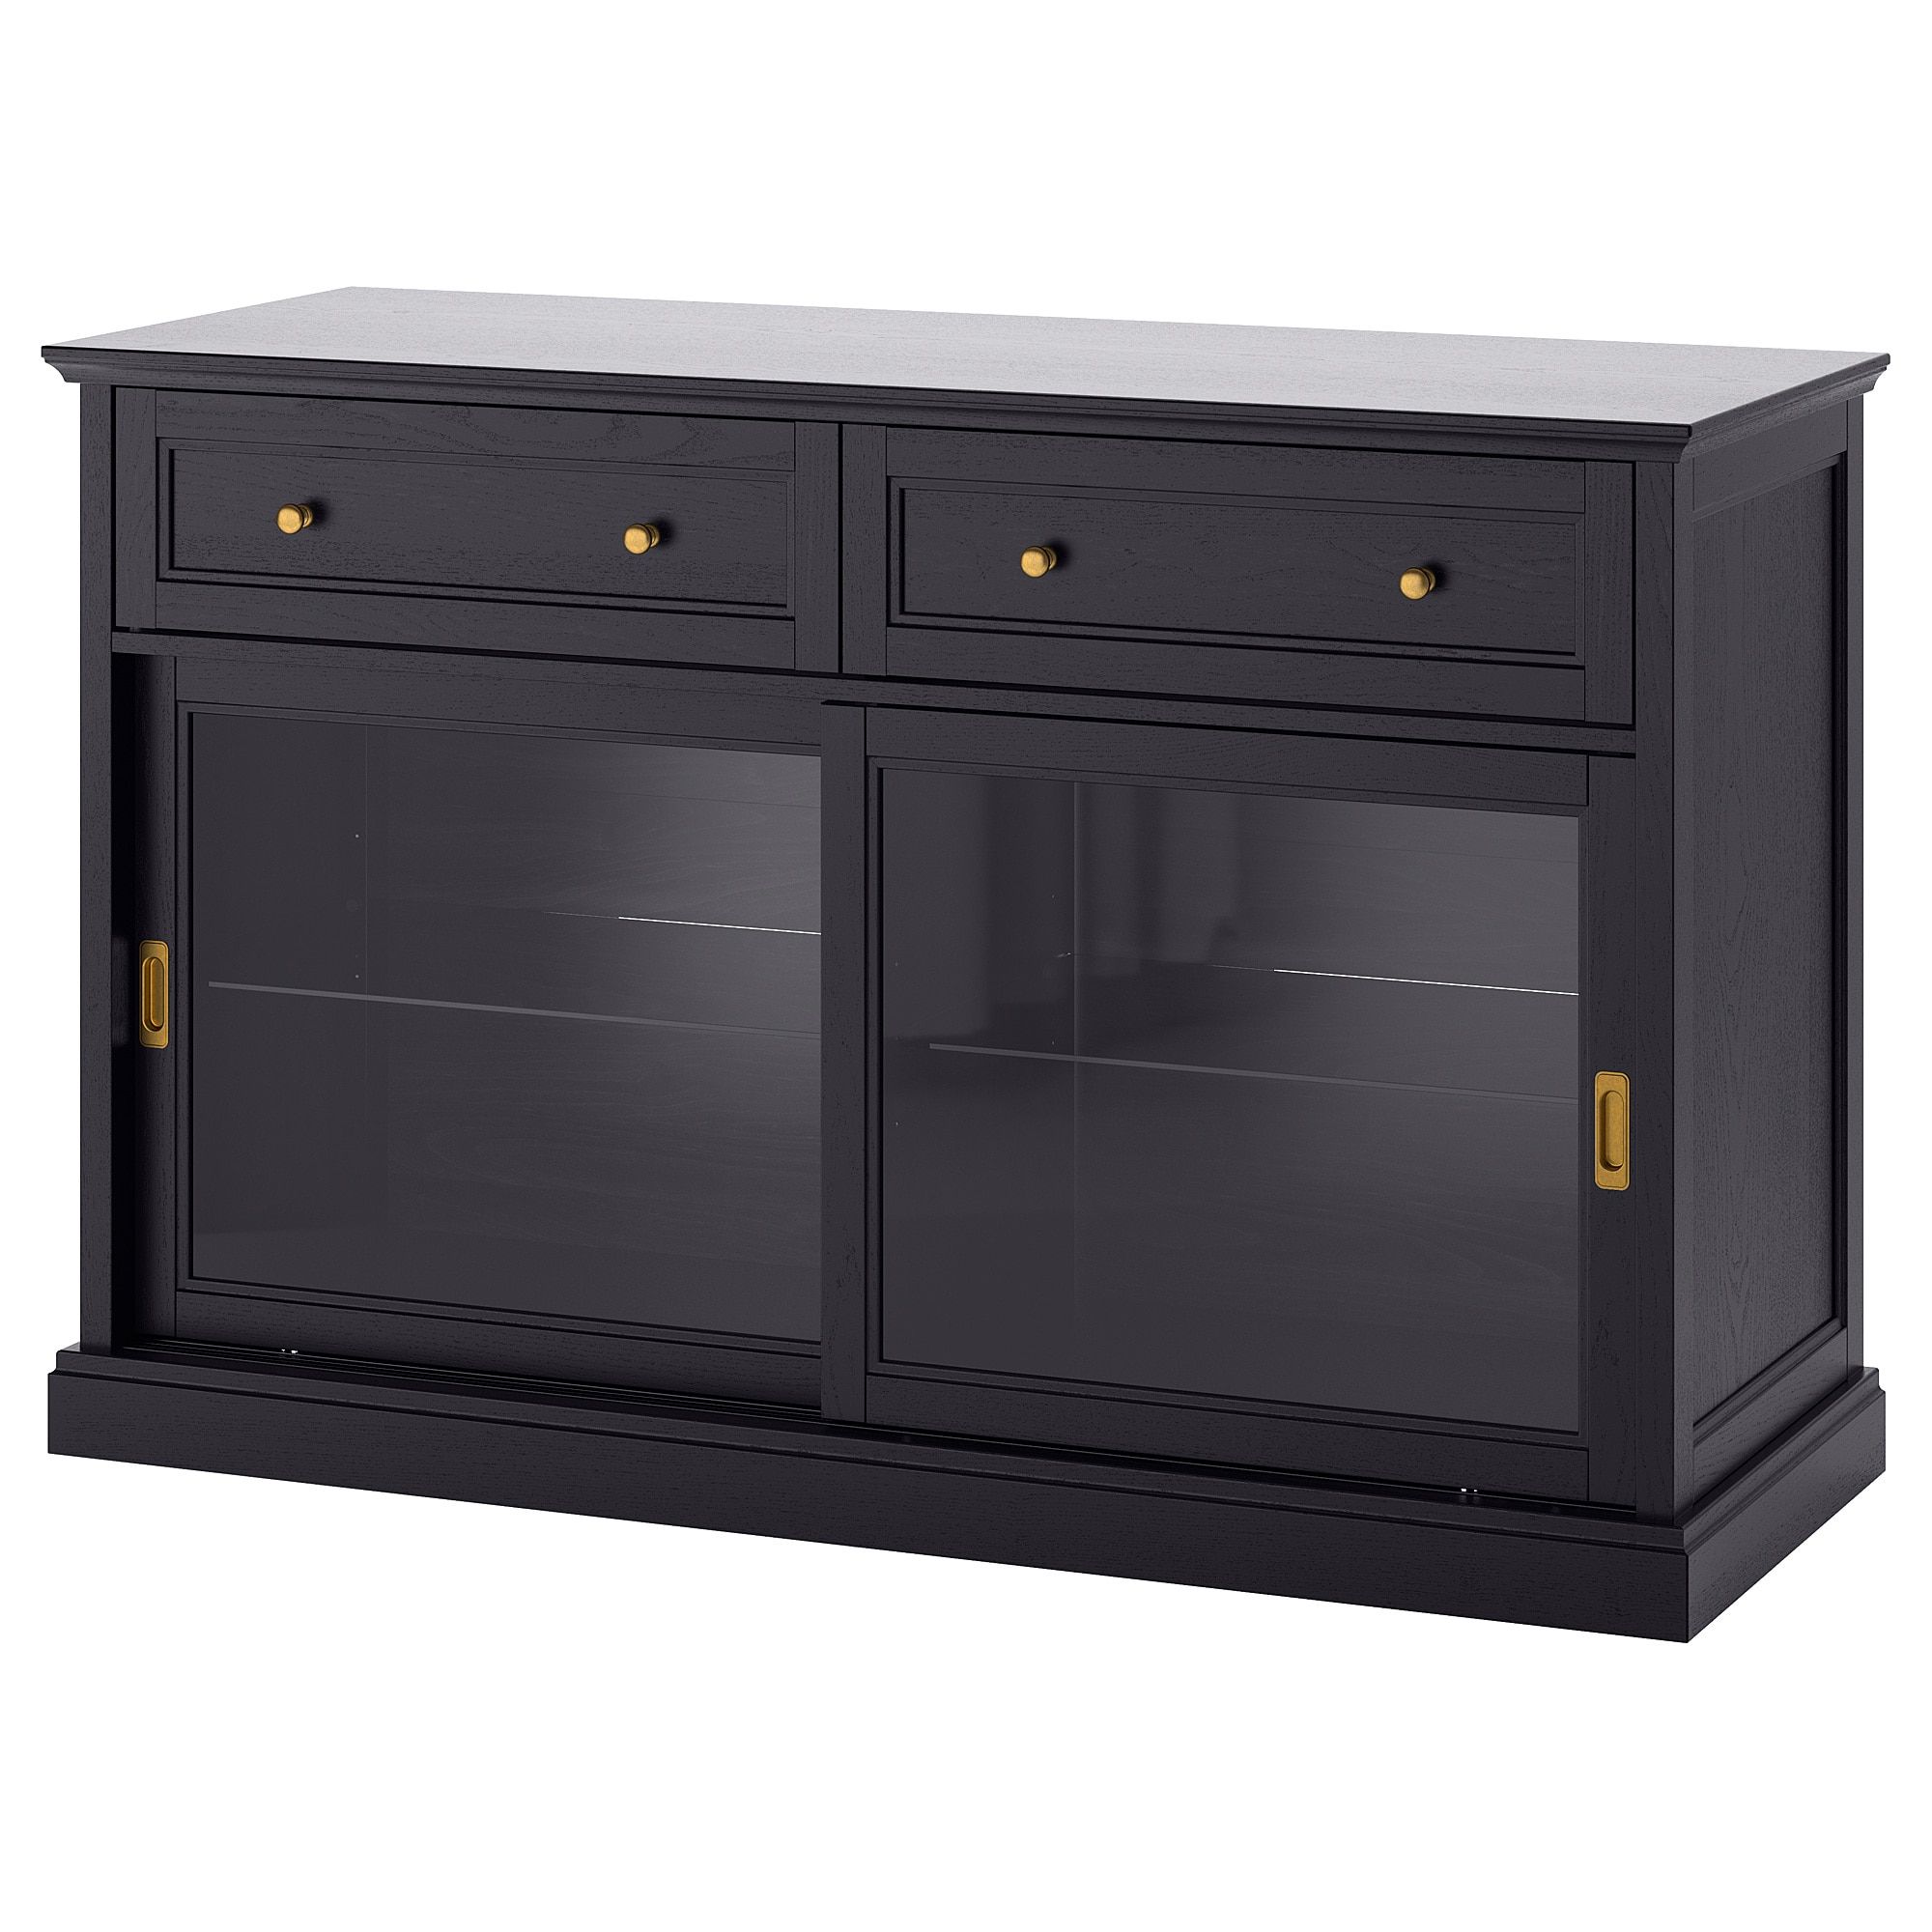 Malsjö Sideboard, Black Stained With Regard To Most Recent North York Sideboards (View 6 of 20)